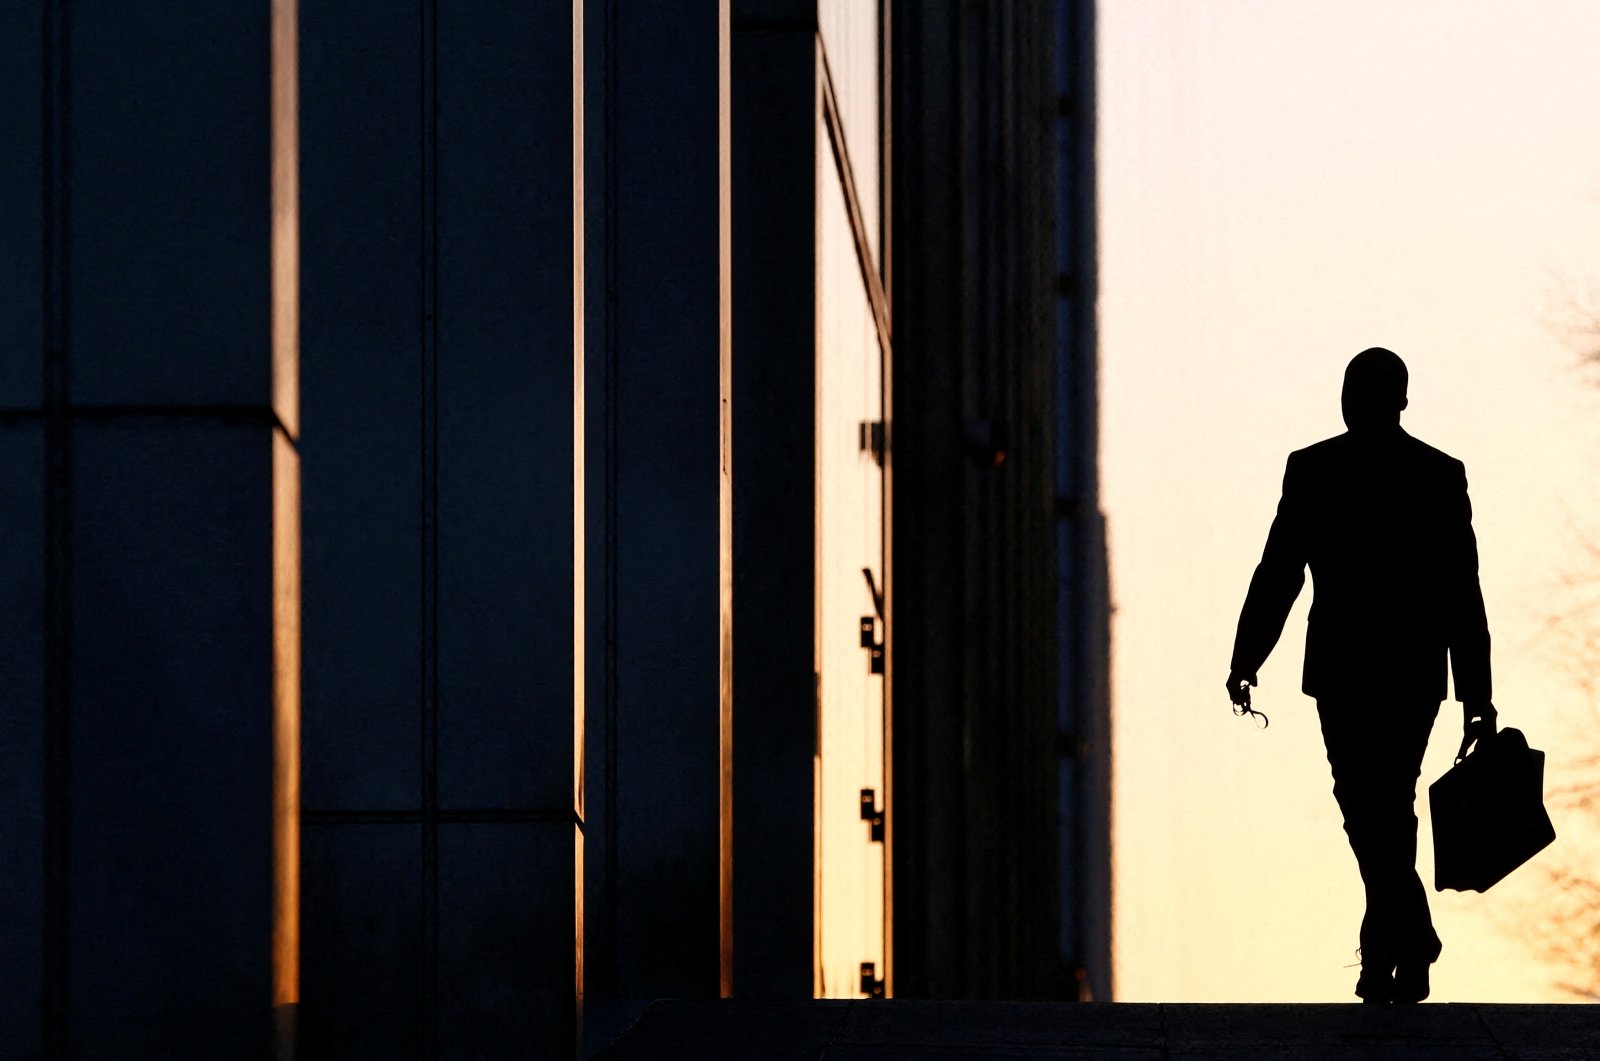 A worker arrives at his office in the Canary Wharf business district in London, U.K., Feb. 26, 2014. (Reuters Photo)